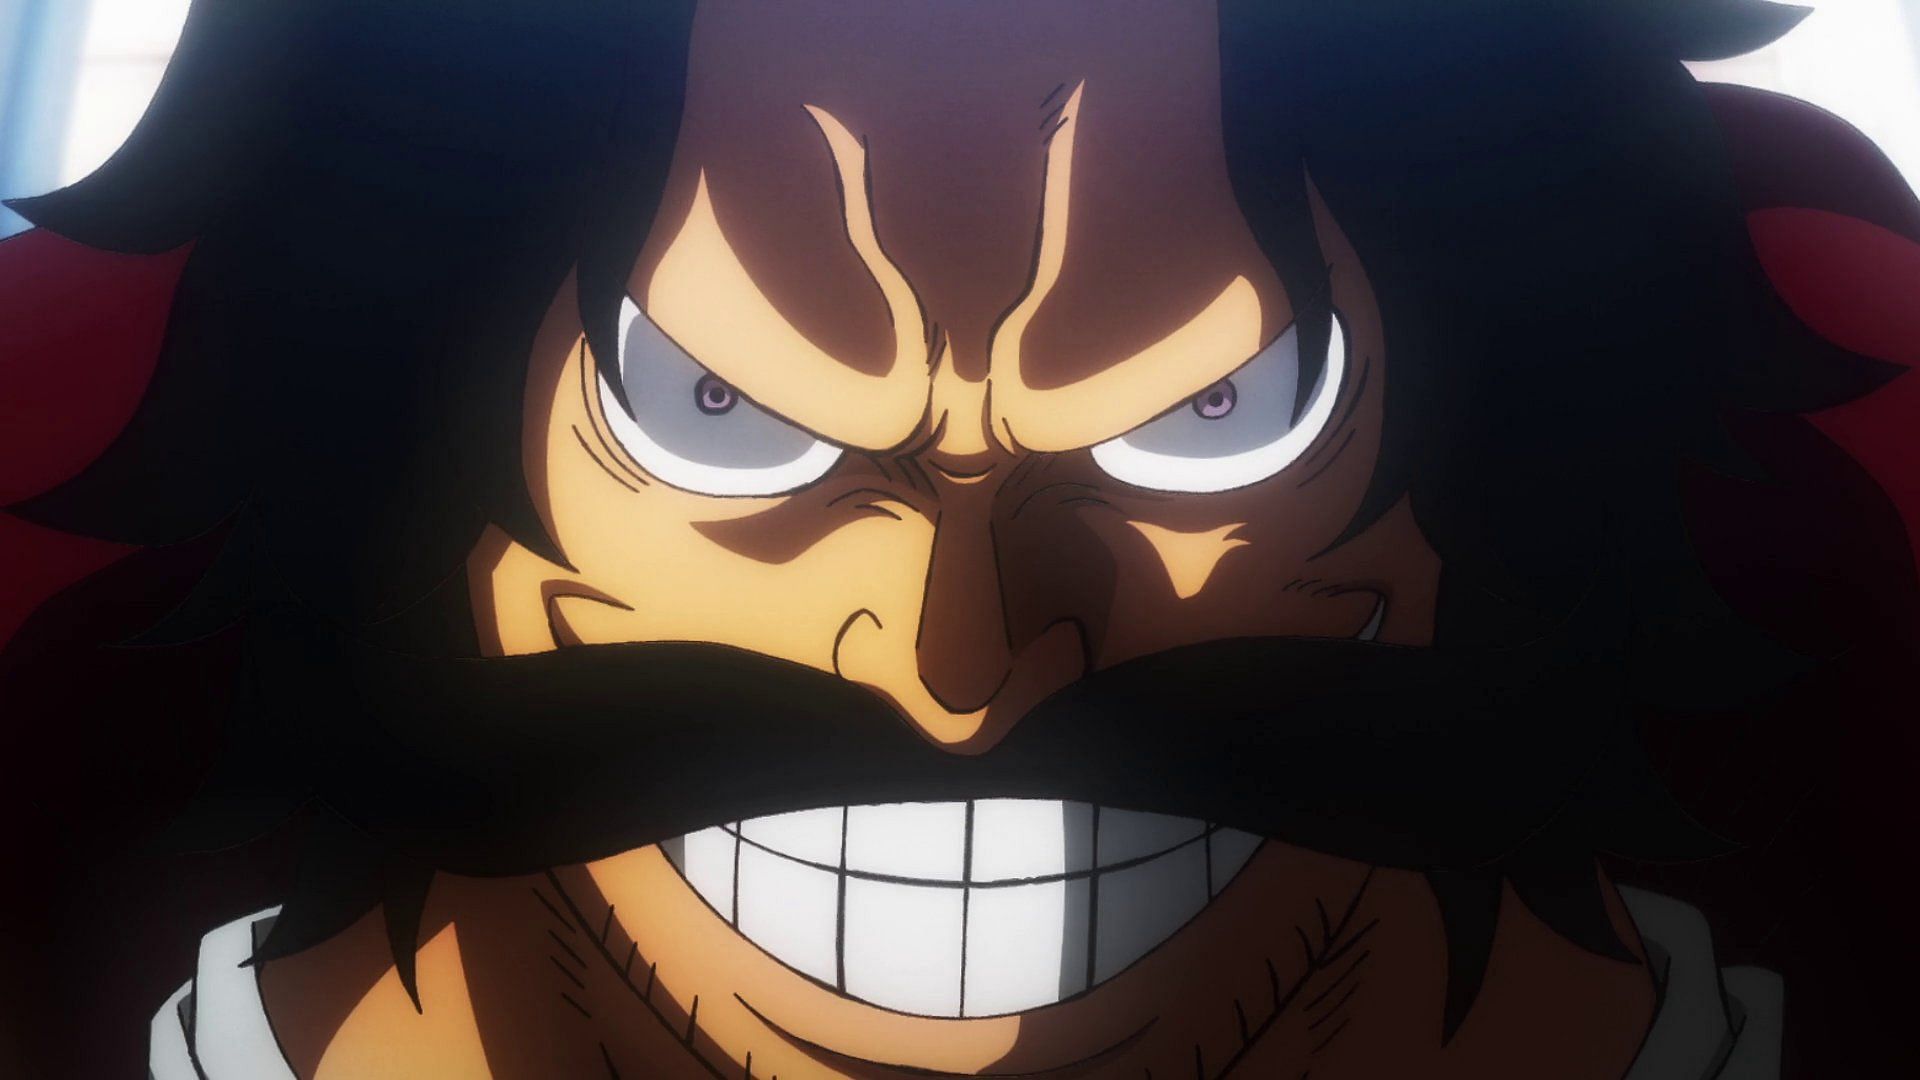 One Piece Episode 0 will show the final moments of Gol D. Roger (Image via Toei Animation, One Piece)